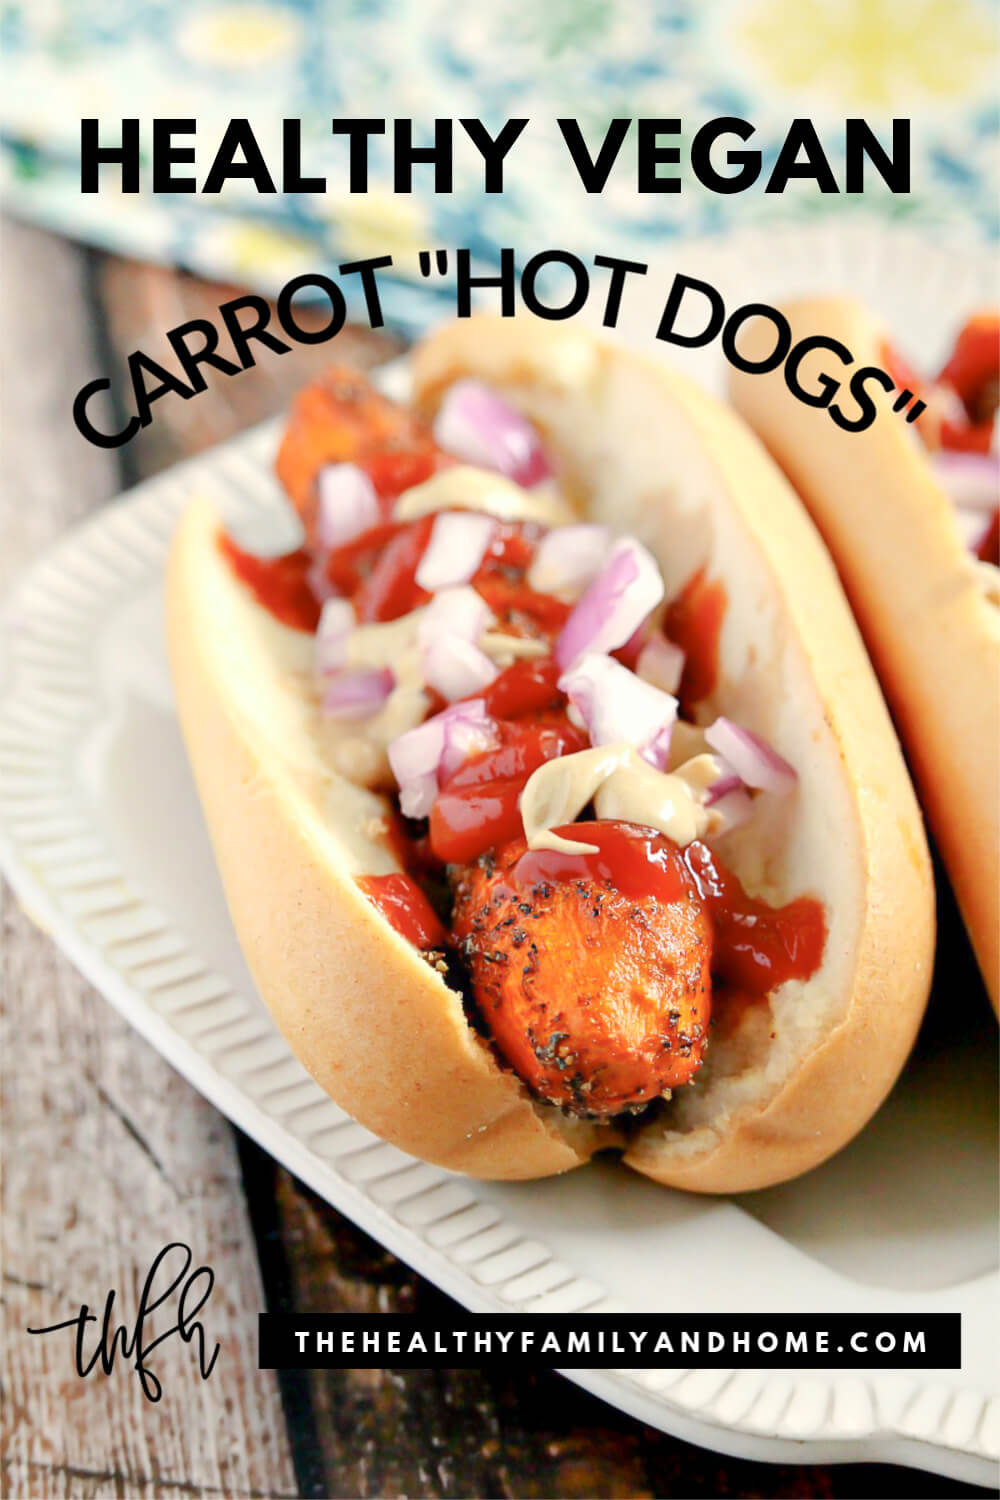 Two Gluten-Free Vegan Healthy Carrot "Hot Dogs" on a cream plate on a wooden background with text overlay